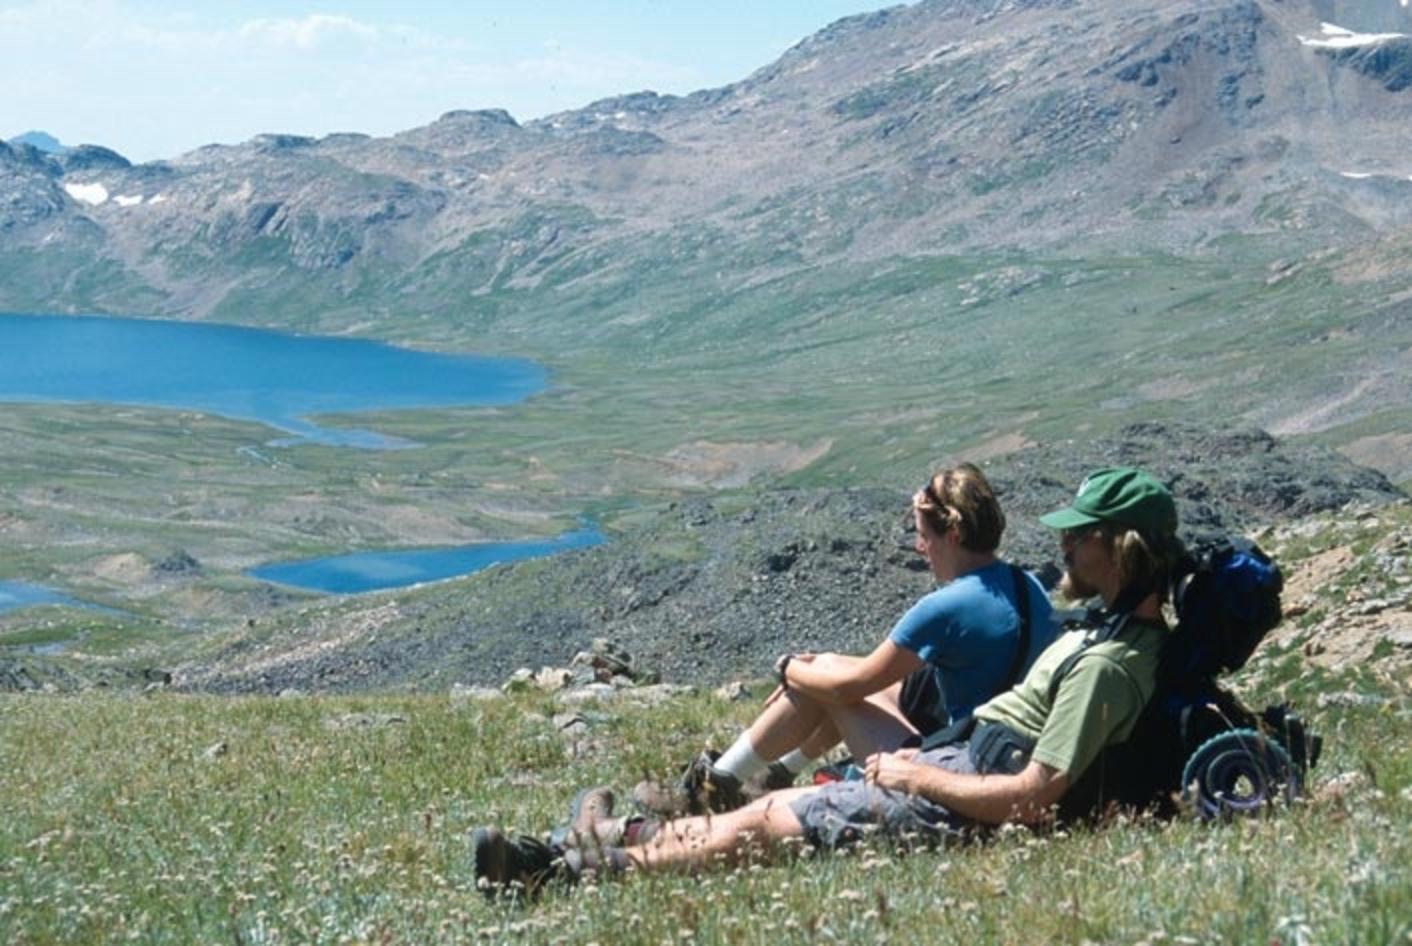 Backpackers rest overlooking Goose Lake. Metcalf played an instrumental role in moving the Absaroka-Beartooth Wilderness bill through Congress.  Photo courtesy Flickr user Lisa Ronald: https://www.flickr.com/photos/40306044@N04/3706658933